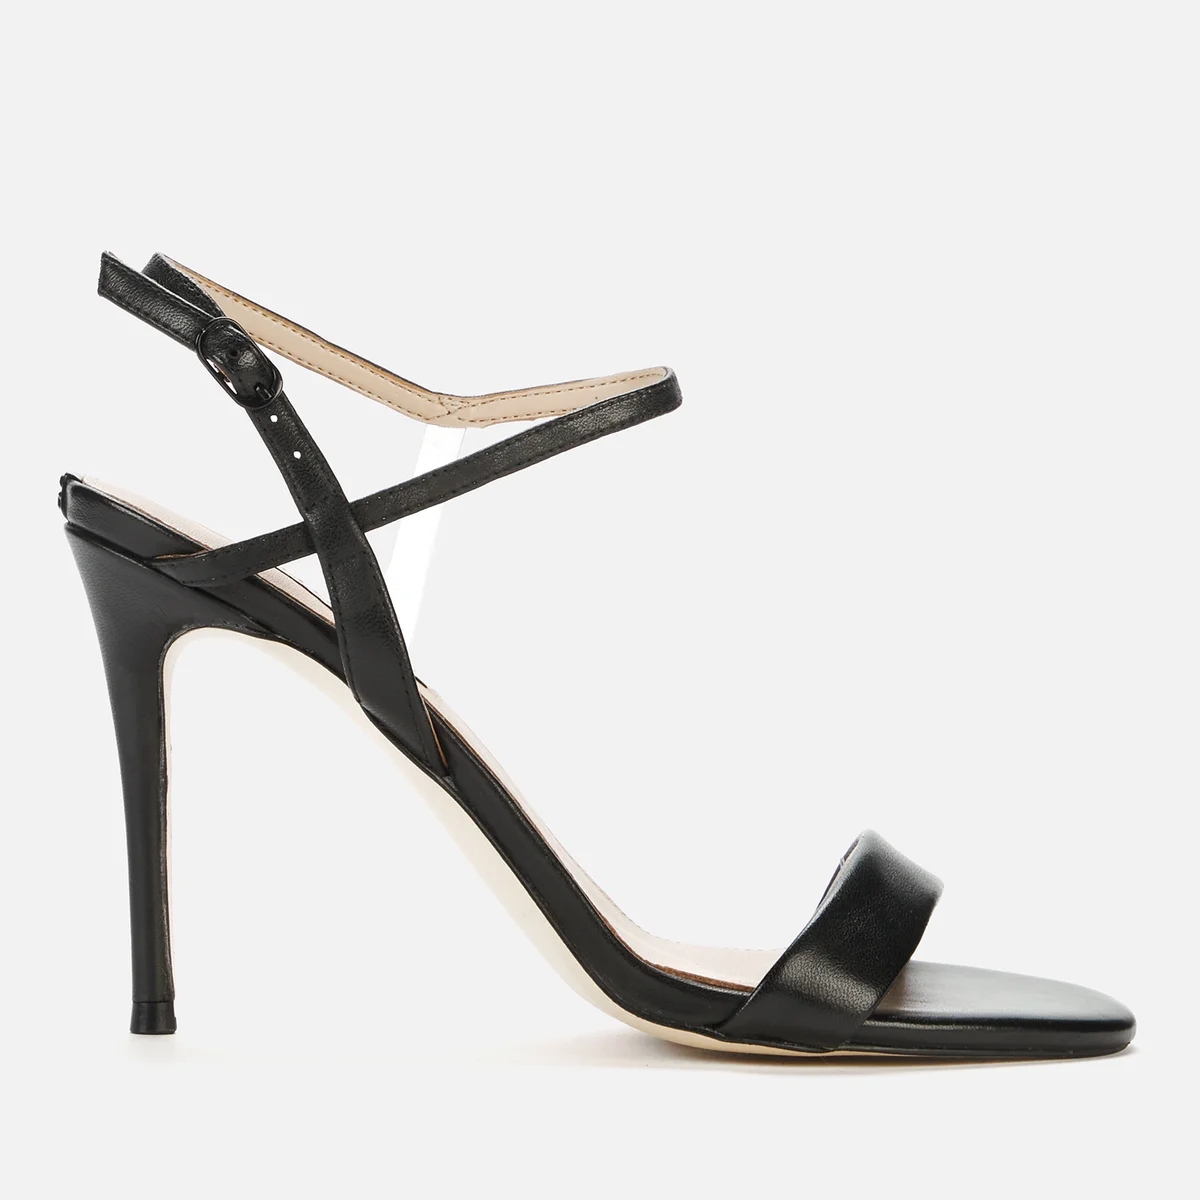 Guess Women's Kabelle Leather Heeled Sandals - Black Image 1